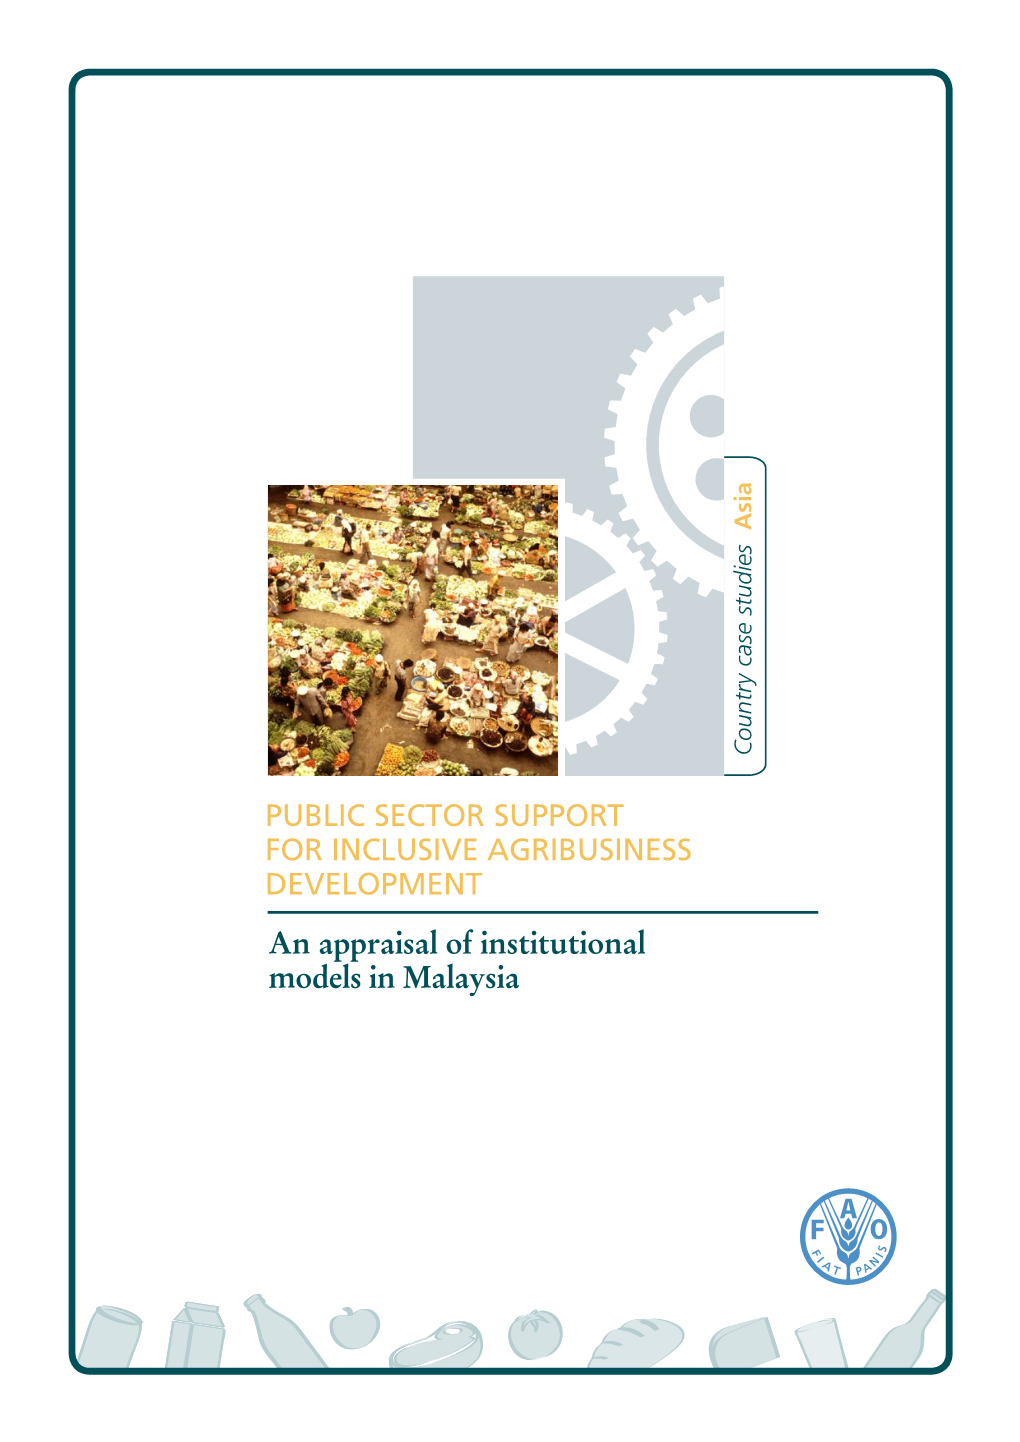 PUBLIC SECTOR SUPPORT for INCLUSIVE AGRIBUSINESS DEVELOPMENT an Appraisal of Institutional Models in Malaysia